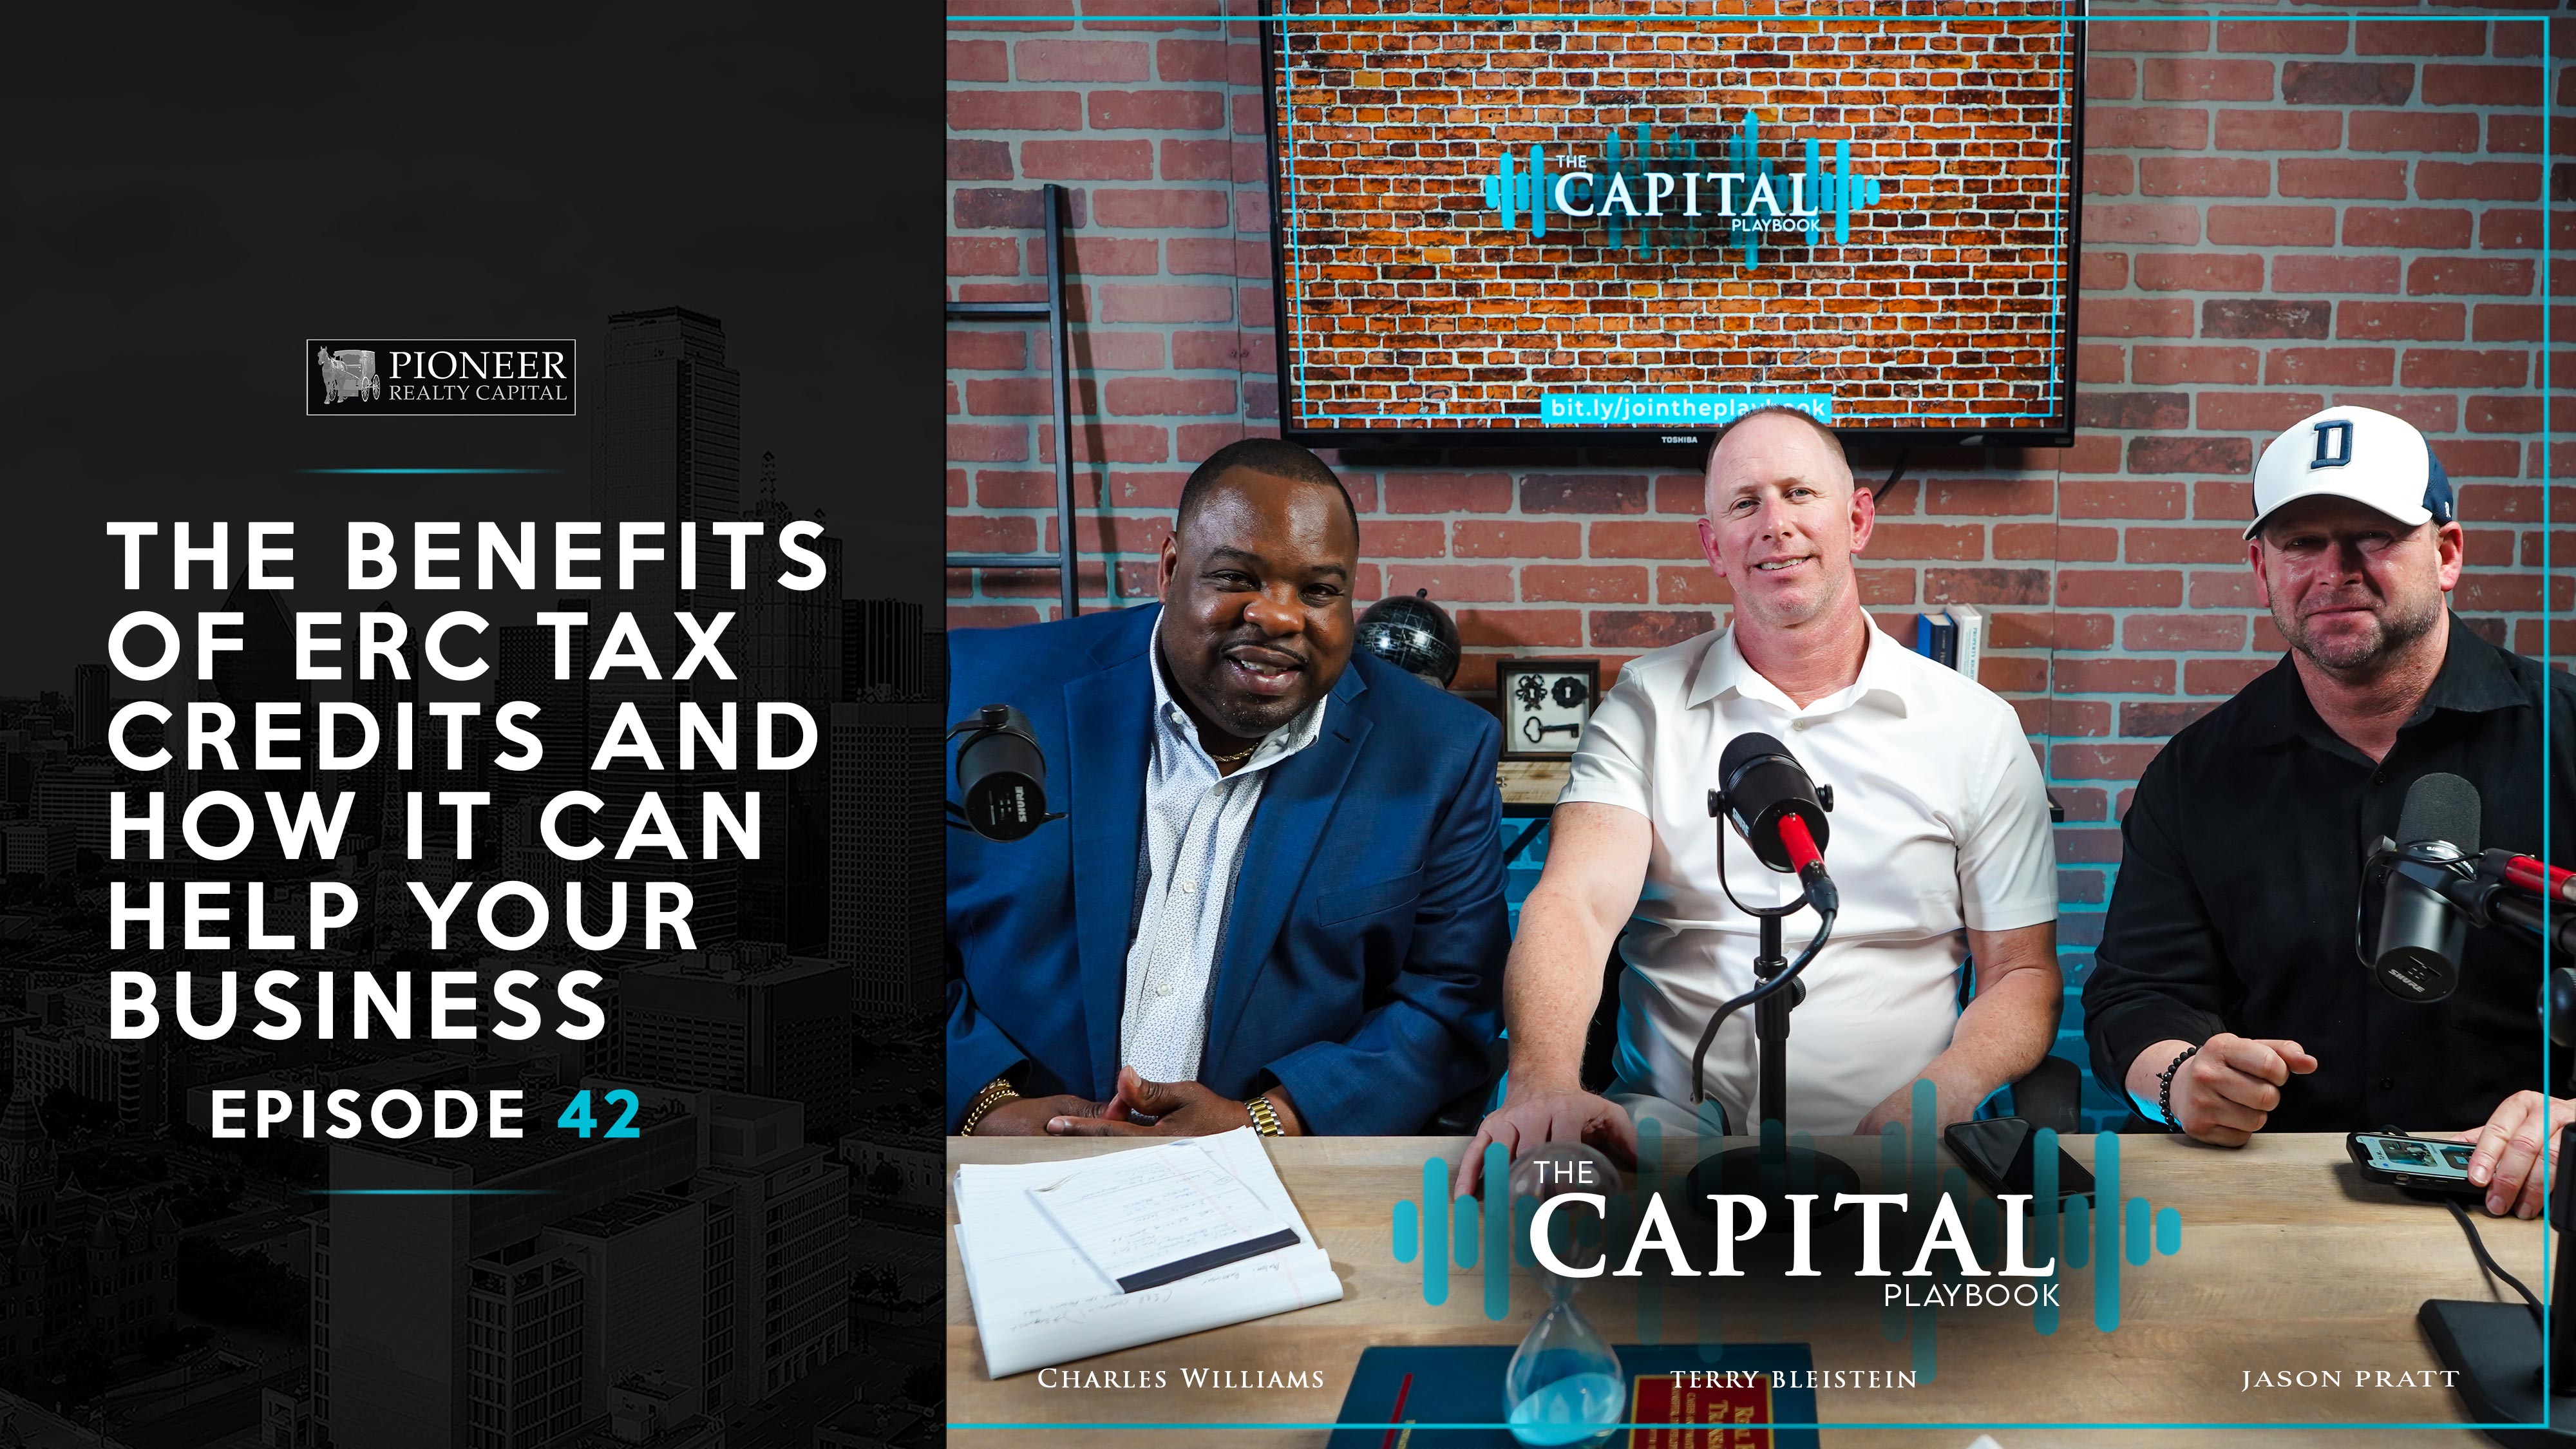 The Benefits of ERC Tax Credits = FREE MONEY for Small Businesses. Watch The Capital Playbook Podcast Show Episode 42 Premiere.